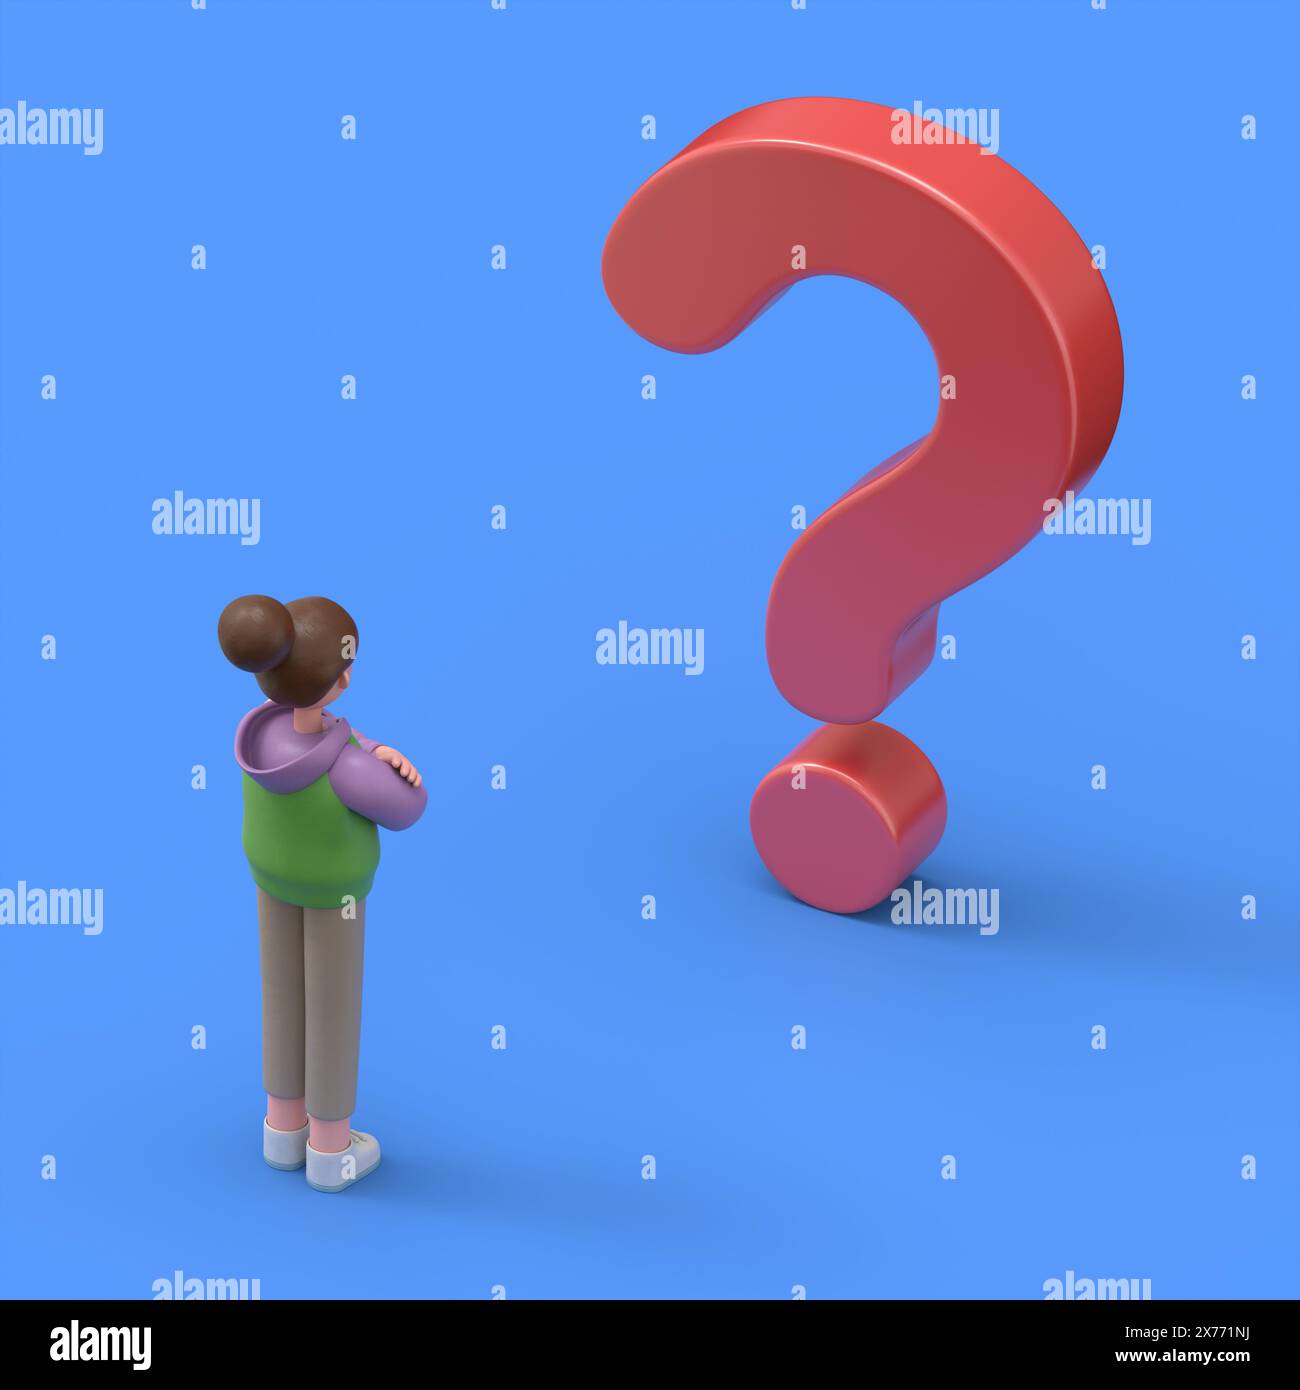 3D illustration of Asian girl Renae faces a big red question mark, solution to a problem or task.3D rendering on blue background. Stock Photo